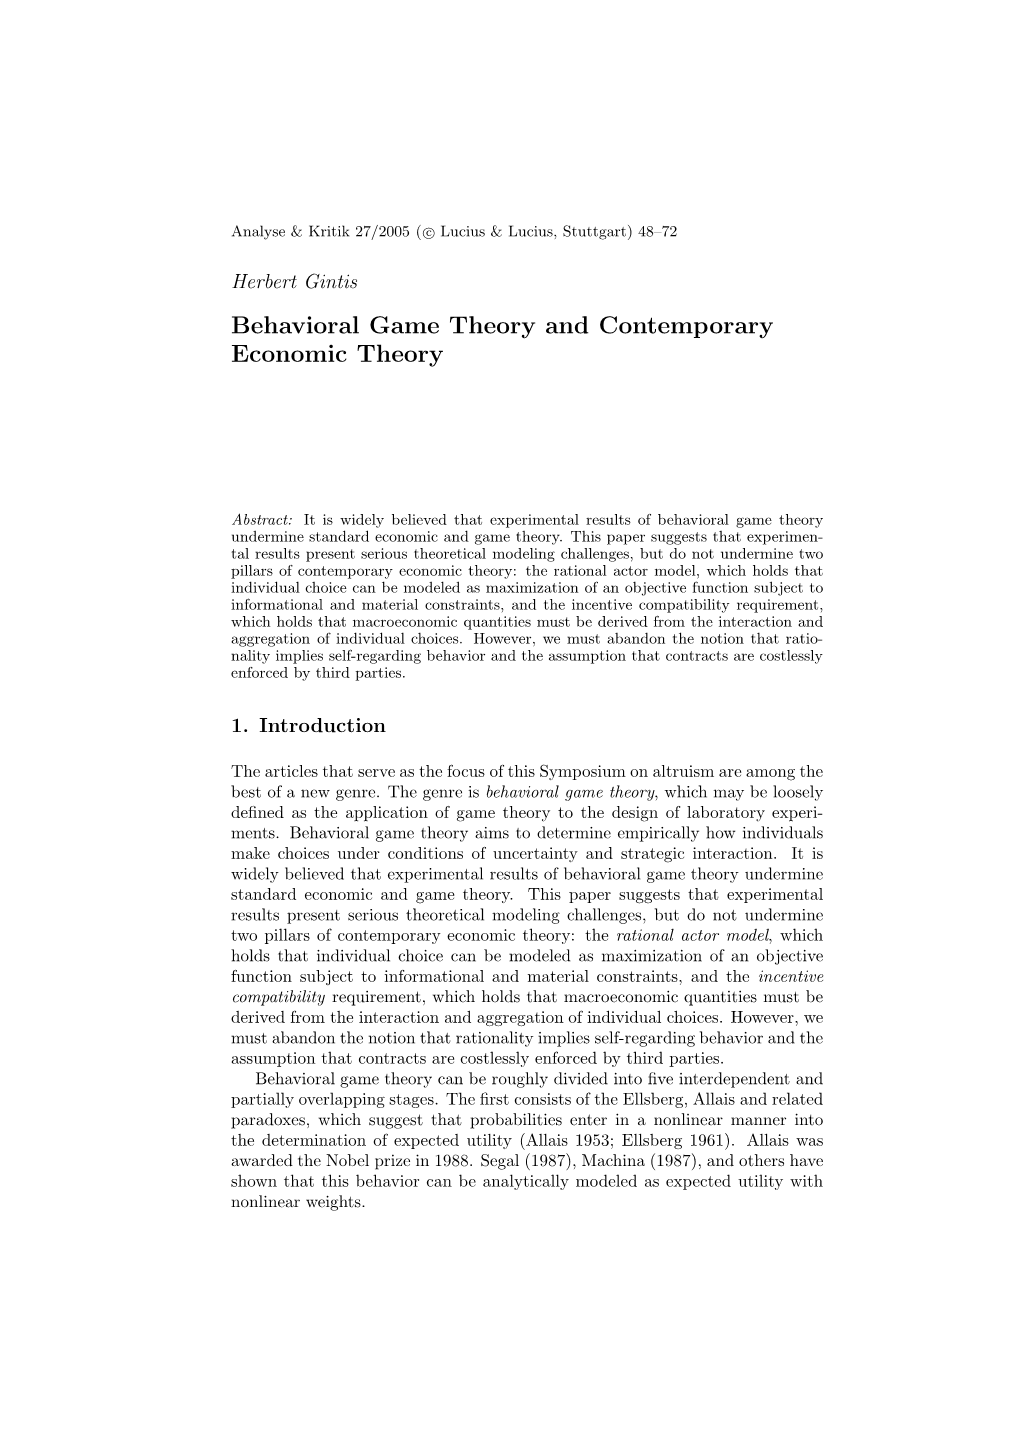 Behavioral Game Theory and Contemporary Economic Theory